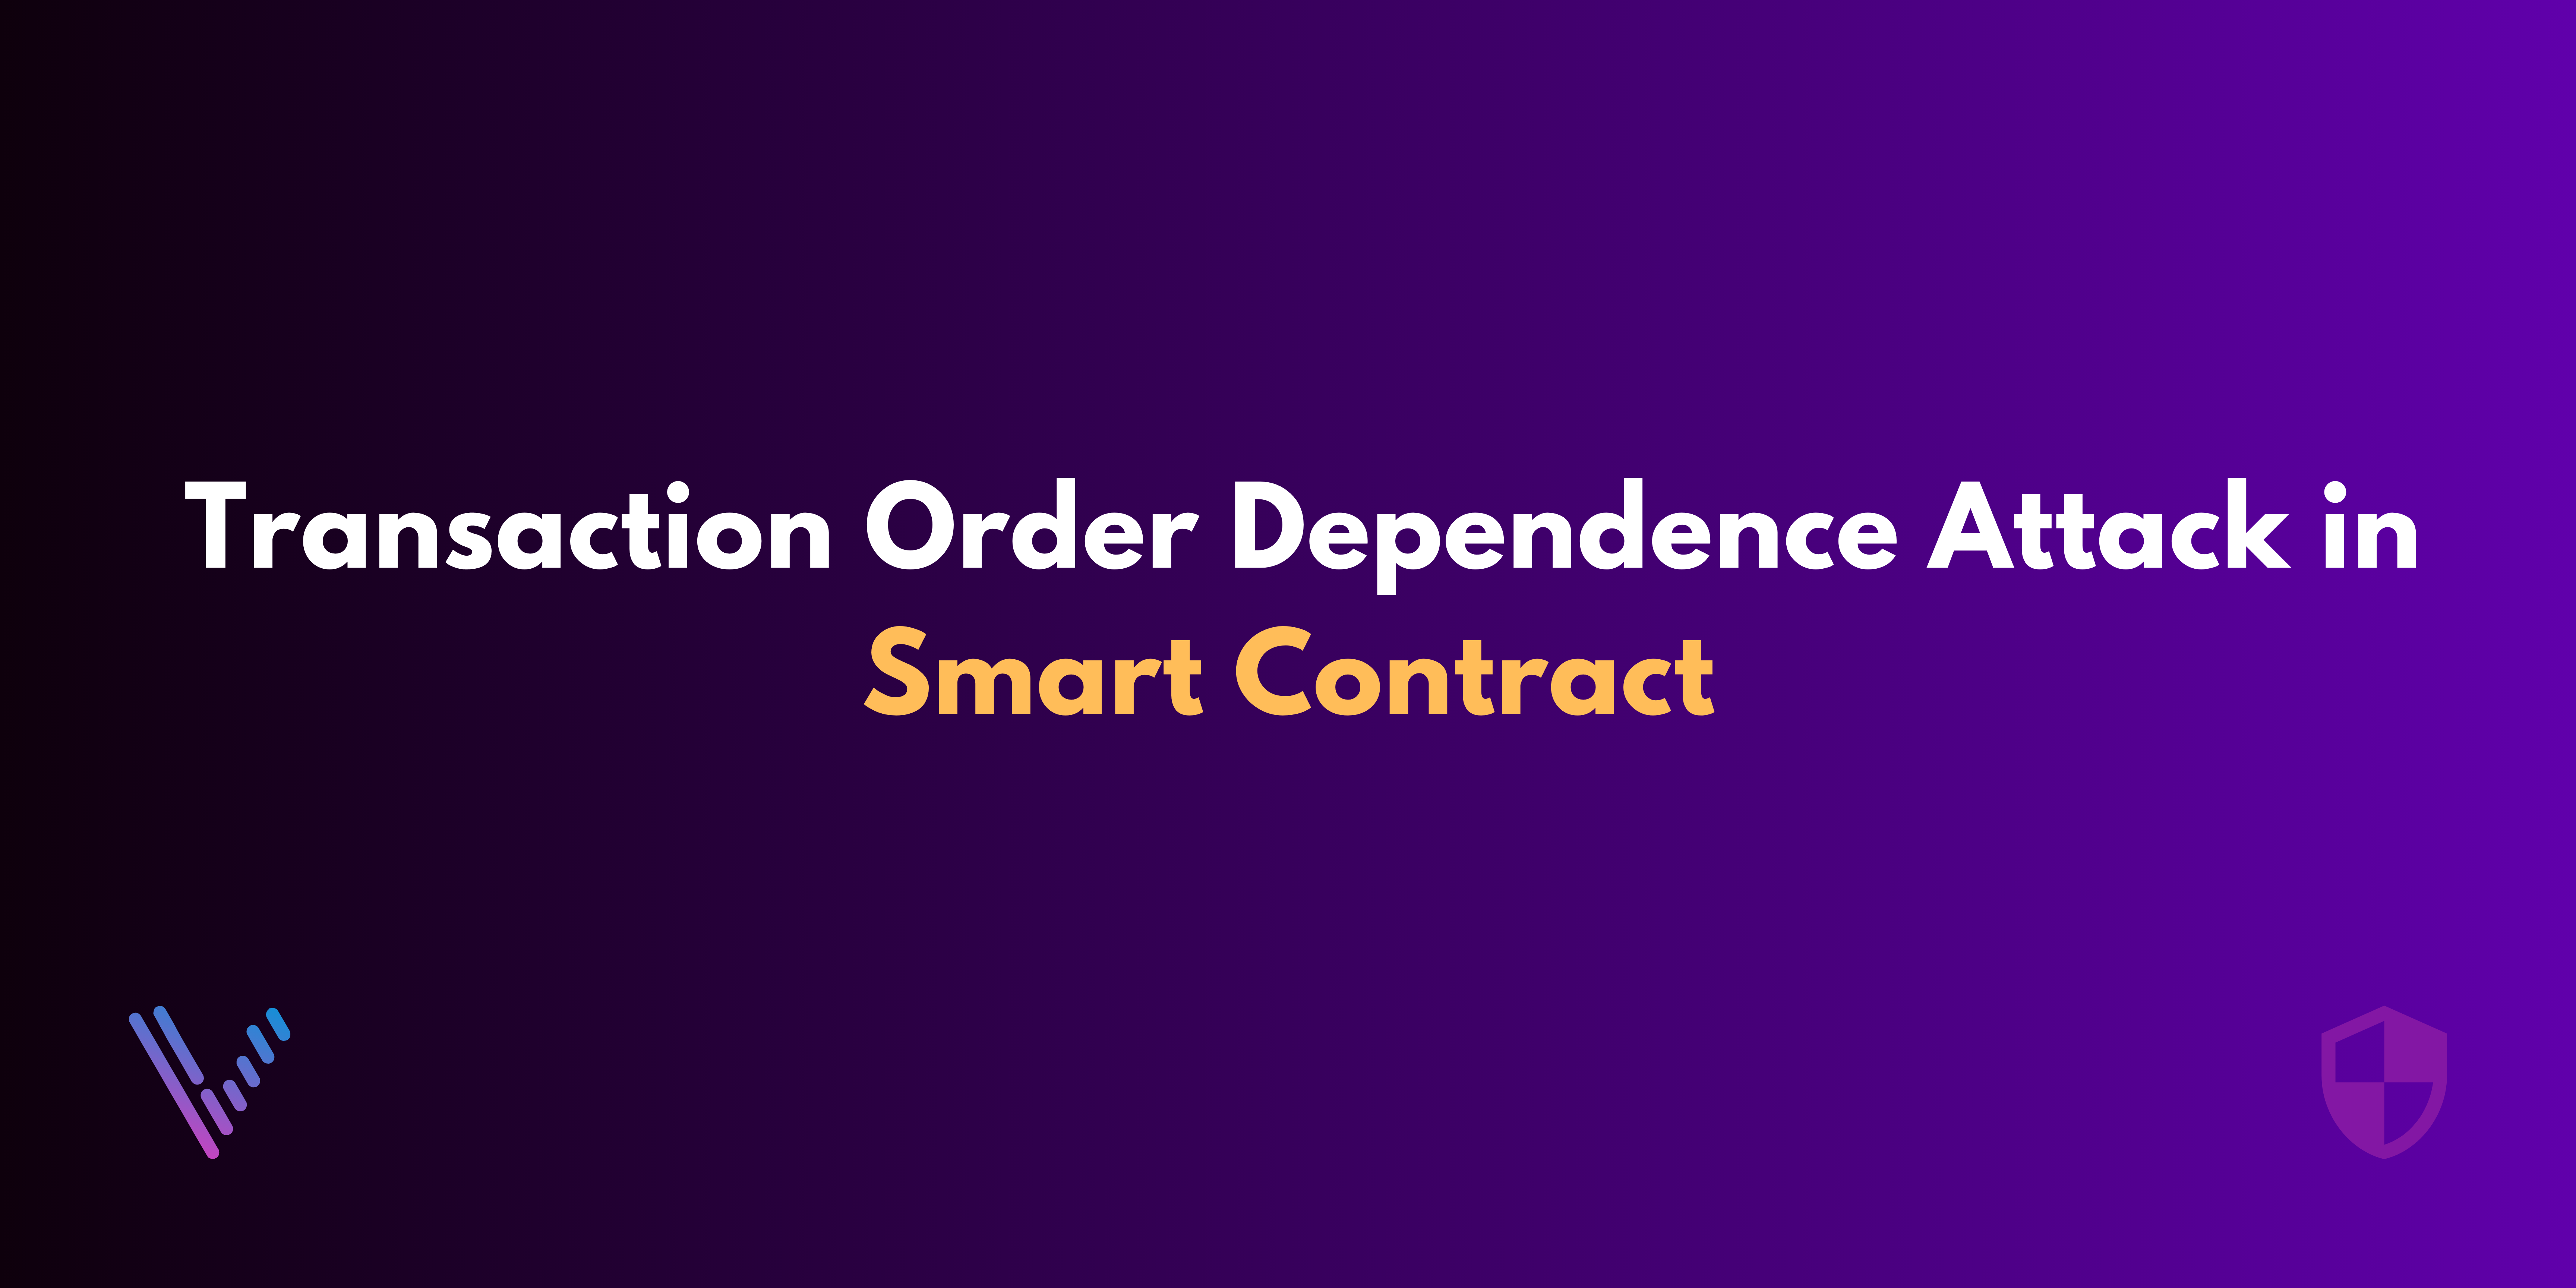 Transaction Order Dependence Attack in Smart Contract